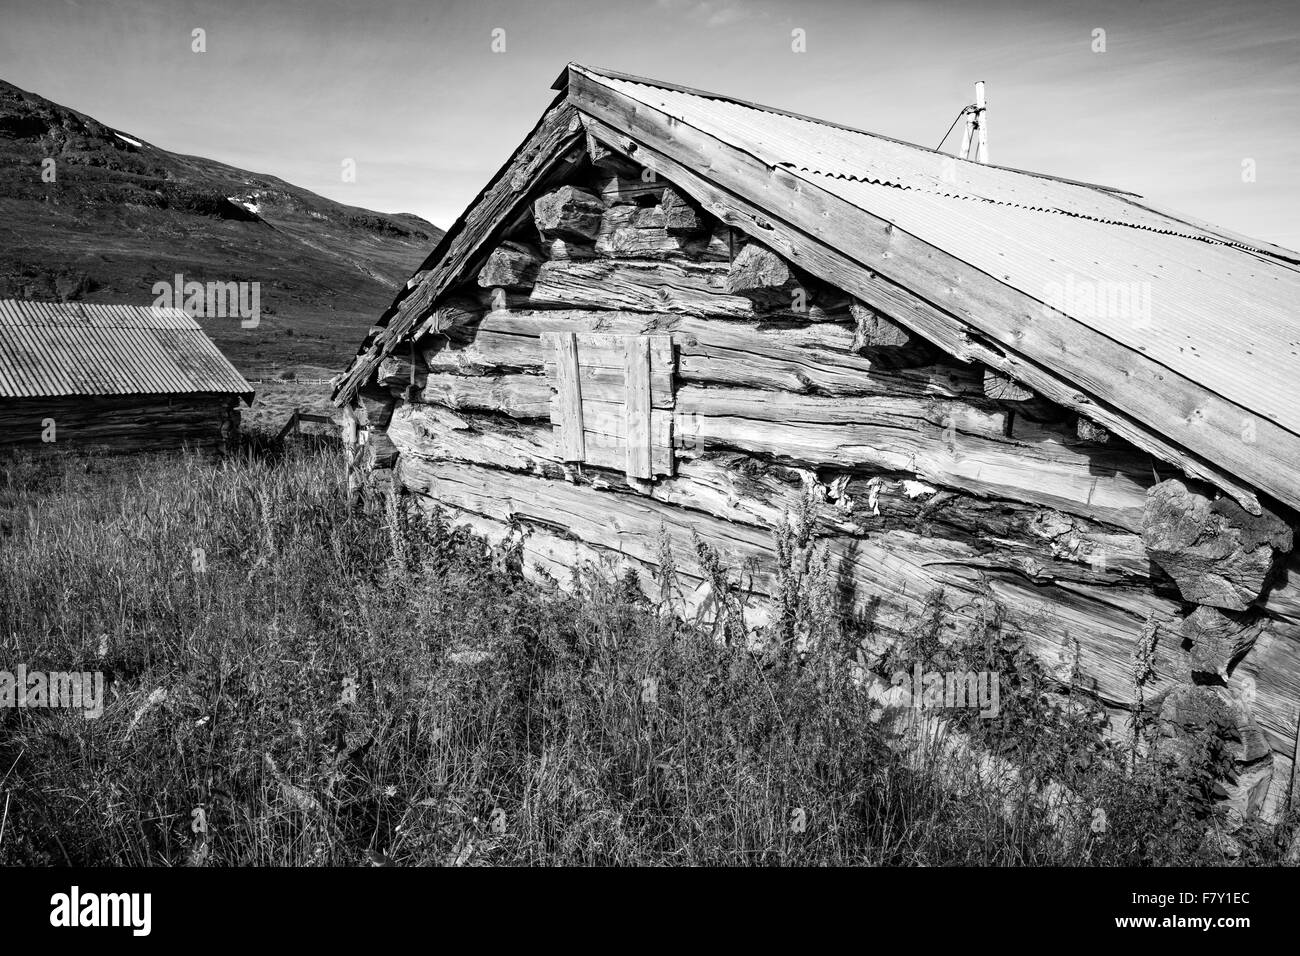 Ancient wooden log farm building with corrugated roof at Brimi in Oppland Norway Stock Photo